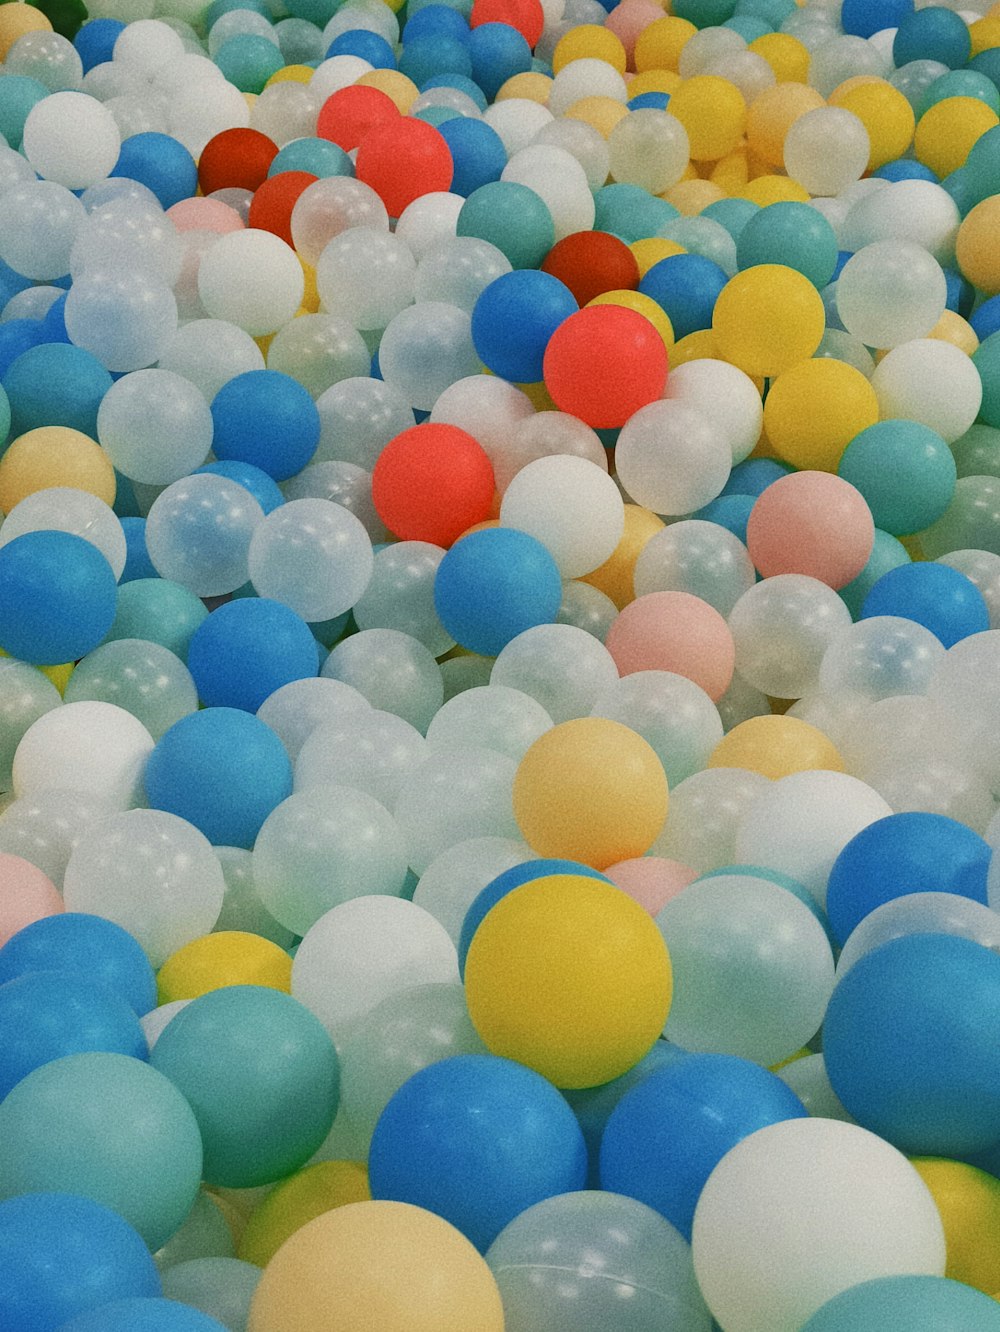 a bunch of balloons that are all different colors